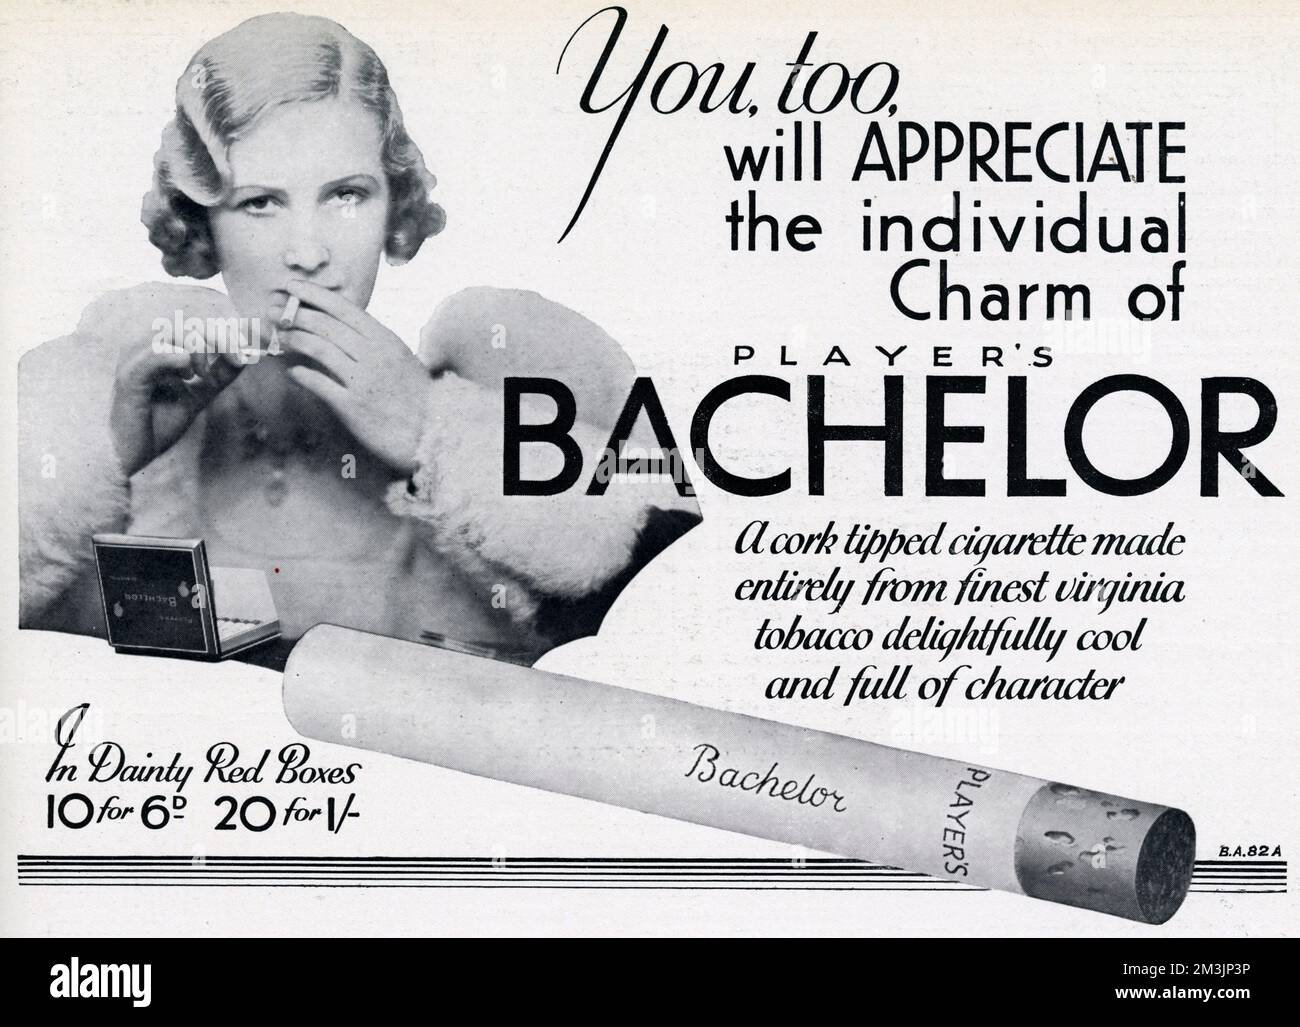 Advert for Bachelor cigarettes inviting you to sample their individual charm and delightful character.  1932 Stock Photo